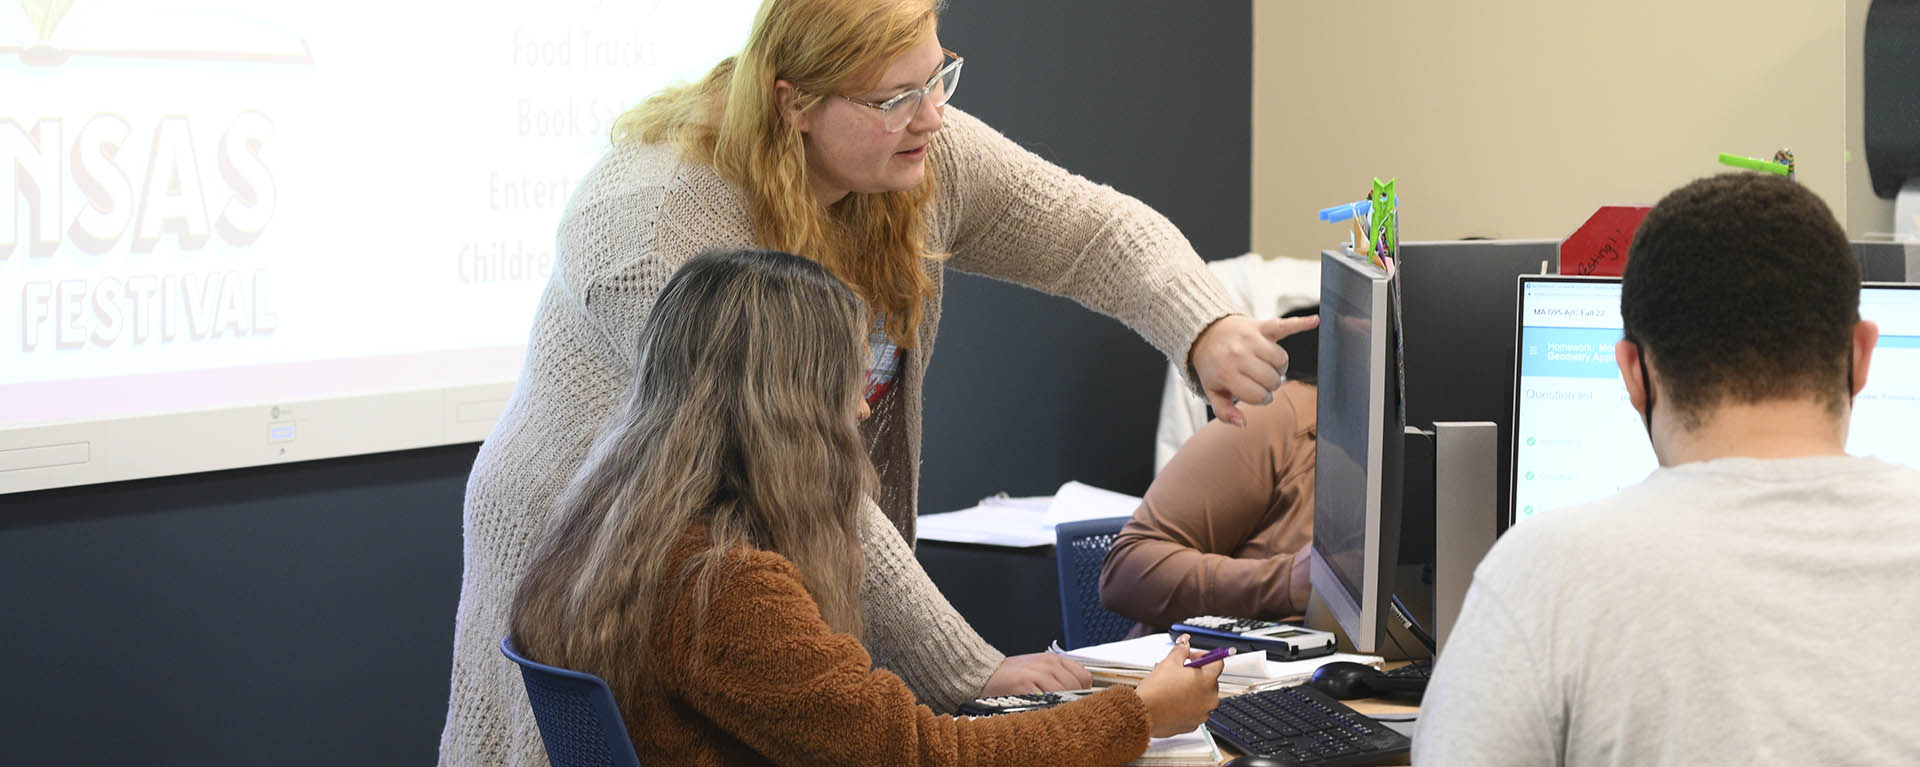 A tutor helps a student with a math problem at a computer.